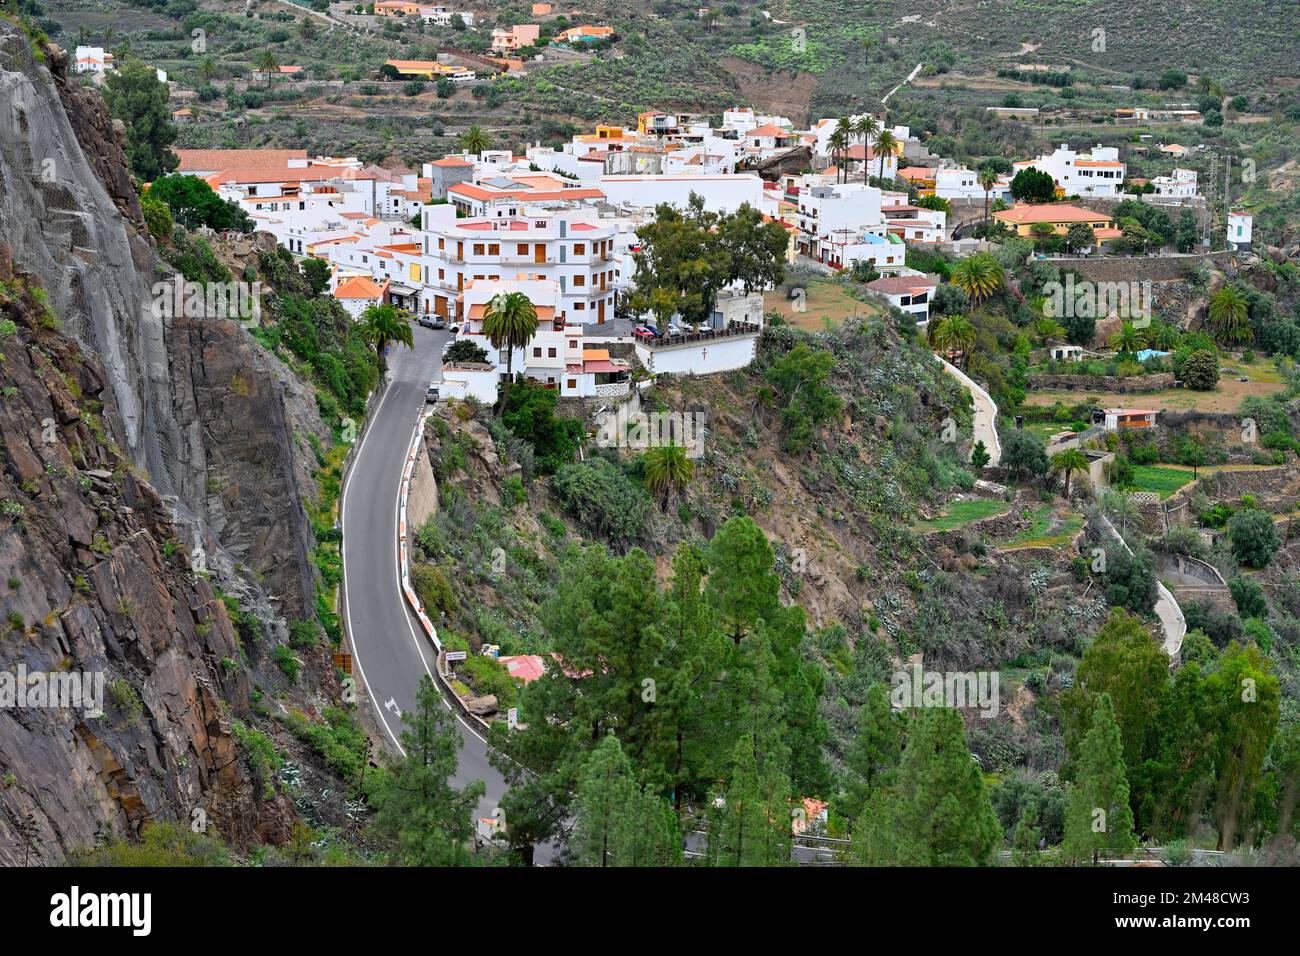 View of picturesque Village of San Bartolomé de Tirajana with white houses in the mountains, Gran Canaria Stock Photo